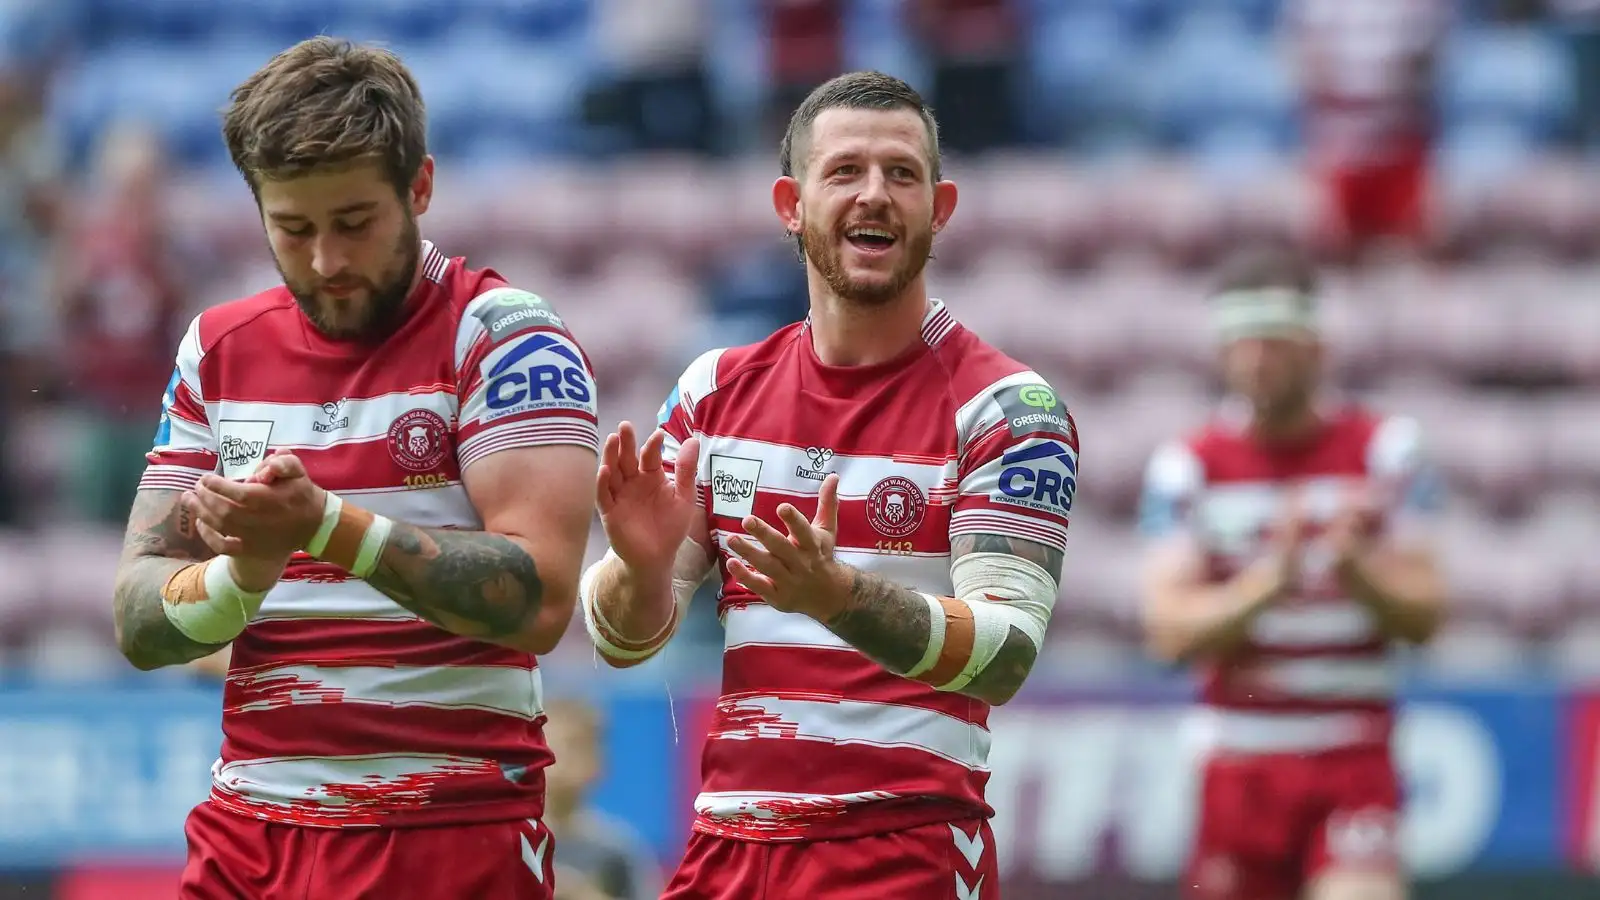 Off-contract Wigan Warriors ace confirms departure via social media: ‘I’ve gained some amazing memories in this jersey’